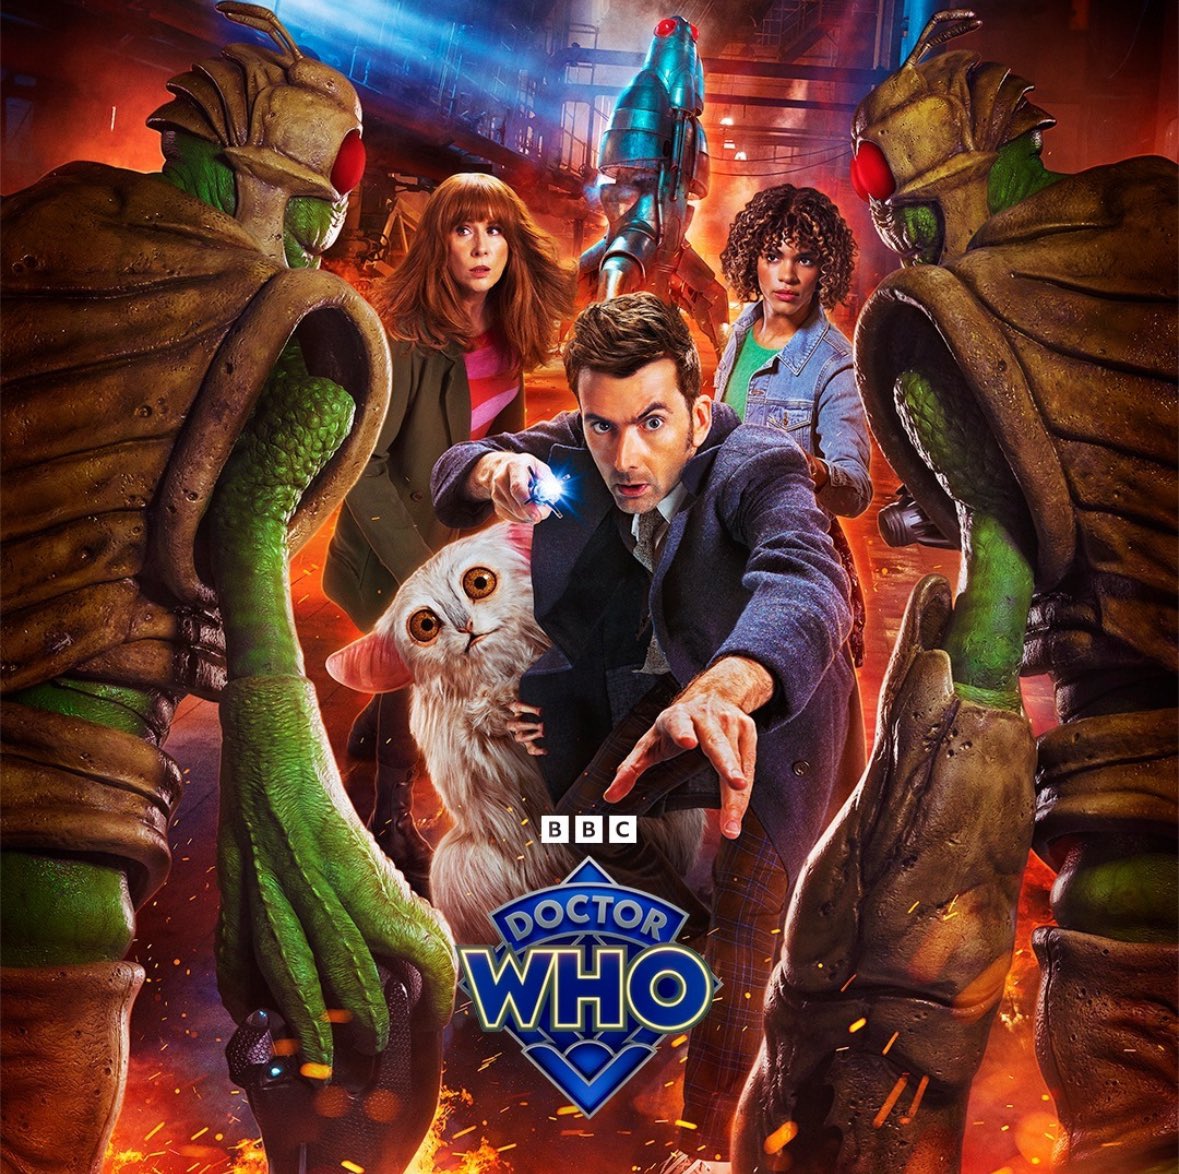 The new poster for David Tennant’s 60th anniversary ‘DOCTOR WHO’ special ‘THE STAR BEAST’ references a Doctor Who Marvel comic, “The Star Beast Saga.” #DoctorWho #DoctorWho60thAnniversary